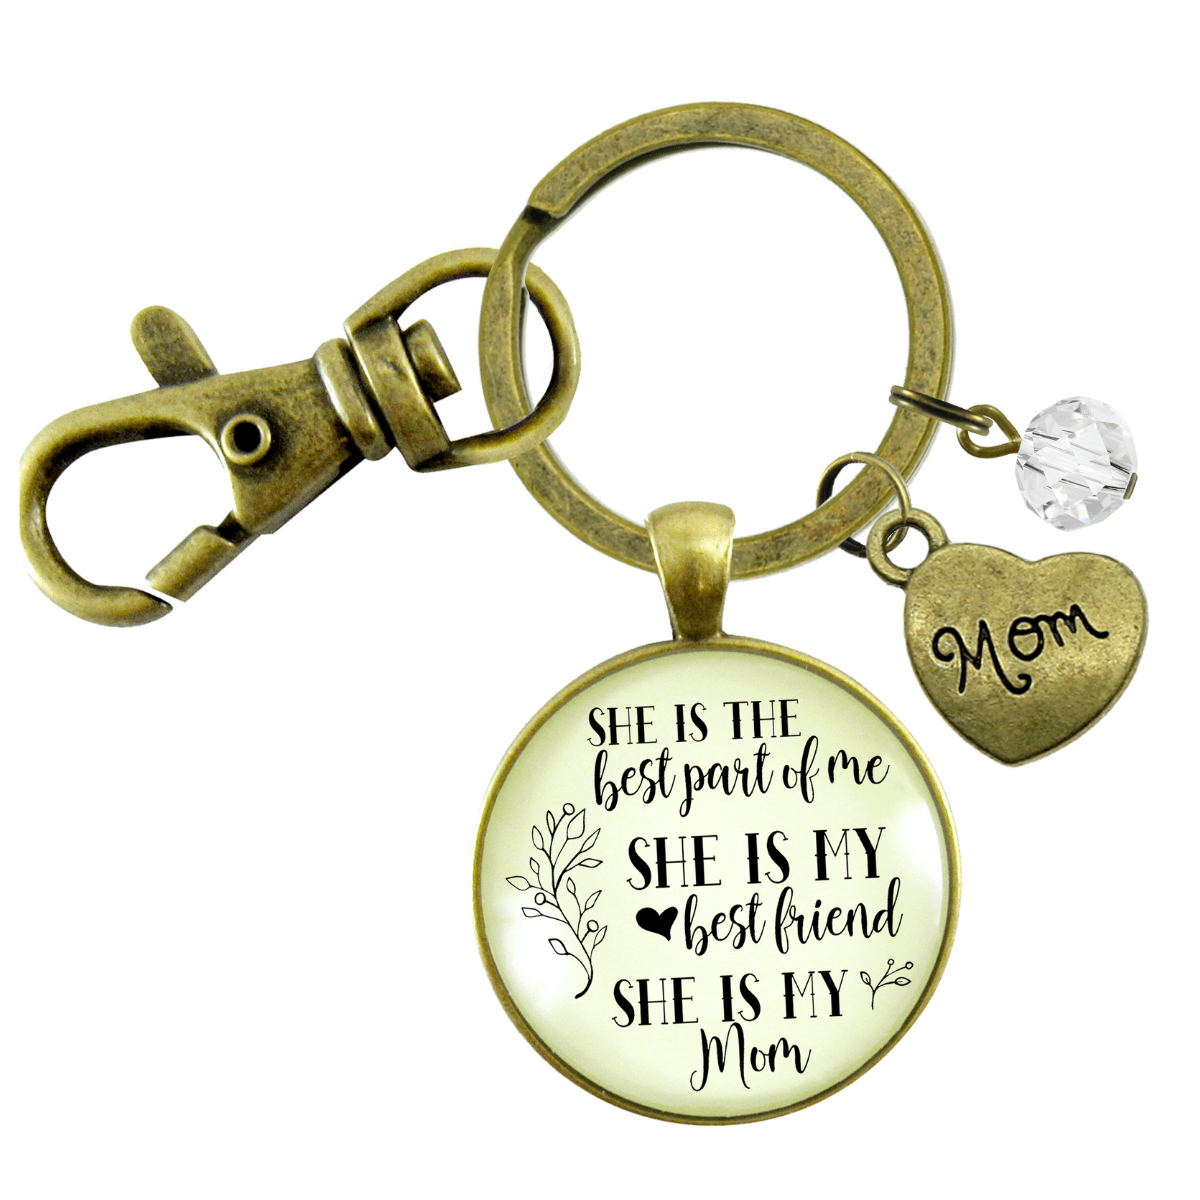 To Mother From Daughter Keychain Best Part of Me Handmade Jewelry Gift Heart Charm - Gutsy Goodness Handmade Jewelry;To Mother From Daughter Keychain Best Part Of Me Handmade Jewelry Gift Heart Charm - Gutsy Goodness Handmade Jewelry Gifts